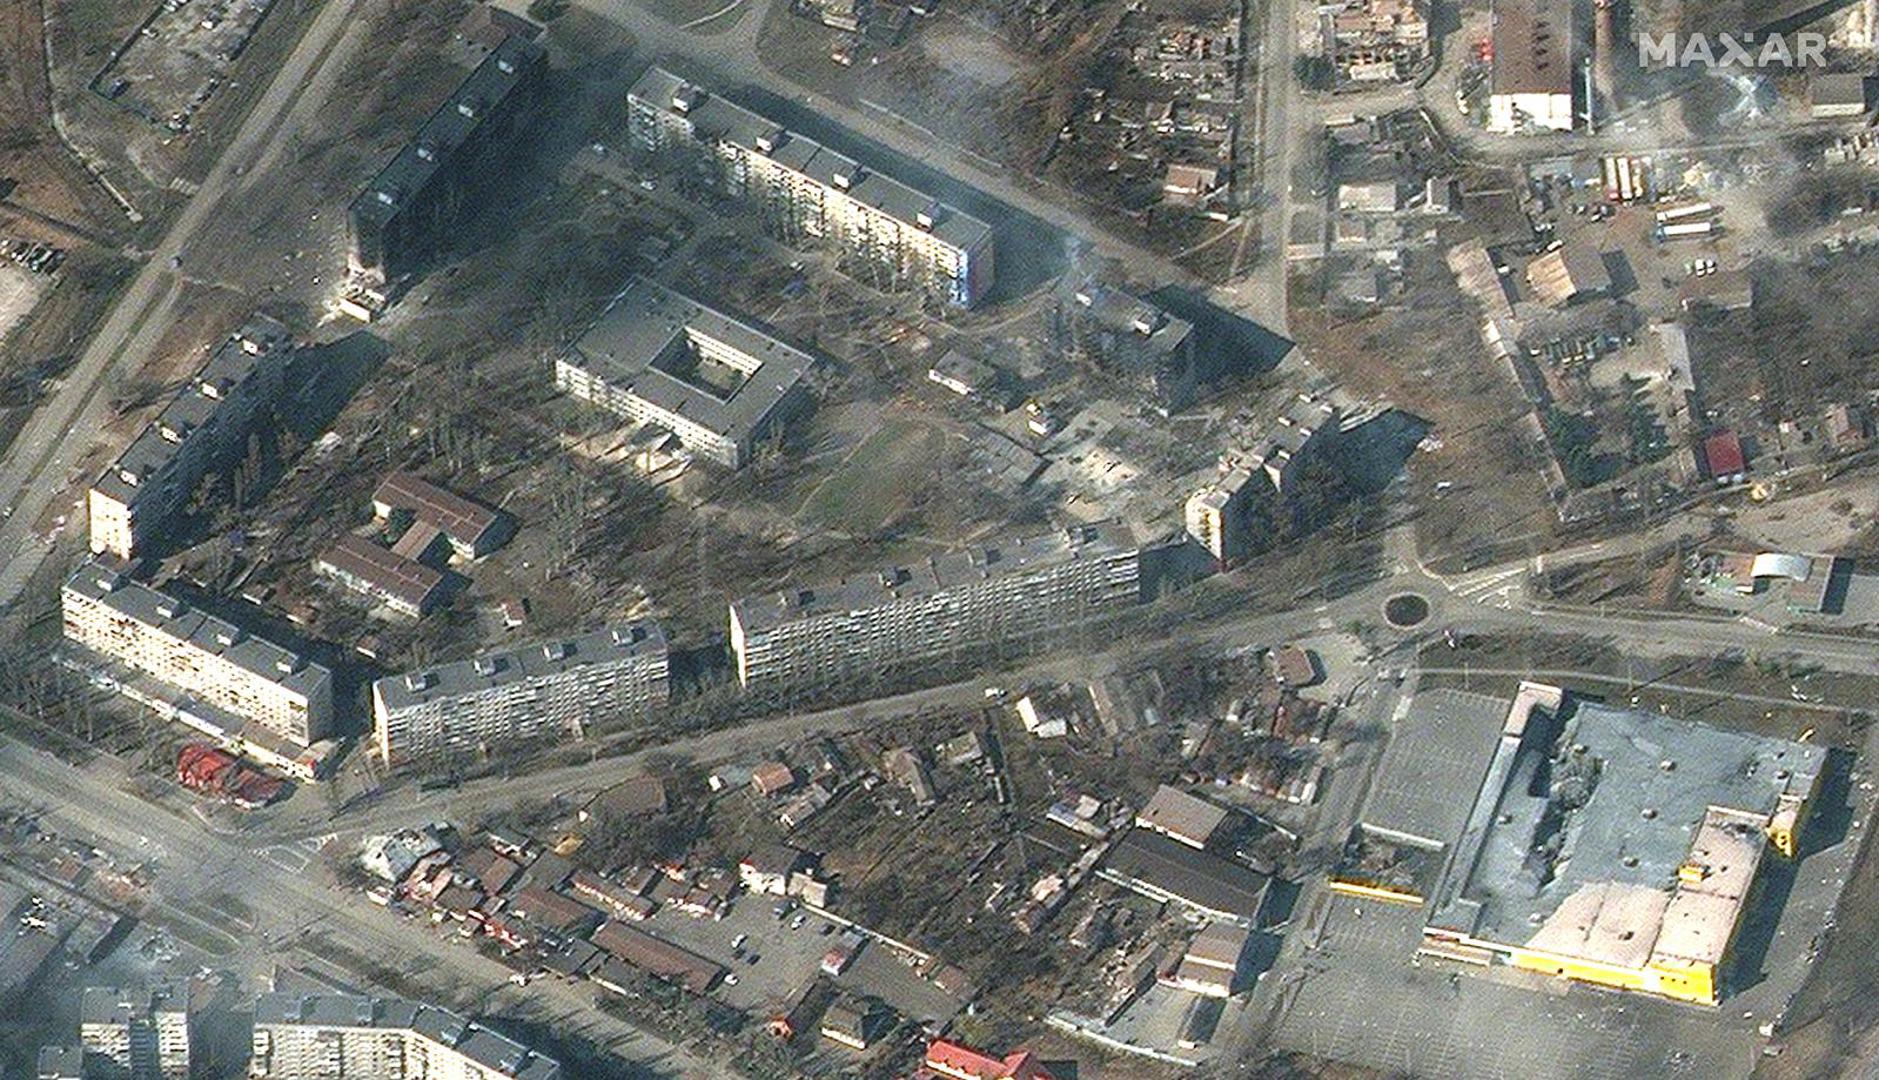 Satellite view of burning and heavily damaged apartment buildings and stores, as Russia's invasion of Ukraine continues, Mariupol, March 18, 2022 in this handout. Satellite image (C) 2022 Maxar Technologies/Handout via REUTERS ATTENTION EDITORS - THIS IMAGE HAS BEEN SUPPLIED BY A THIRD PARTY. MANDATORY CREDIT. WATERMARK MAY NOT BE REMOVED/CROPPED. NO RESALES. NO ARCHIVES Photo: MAXAR TECHNOLOGIES/REUTERS